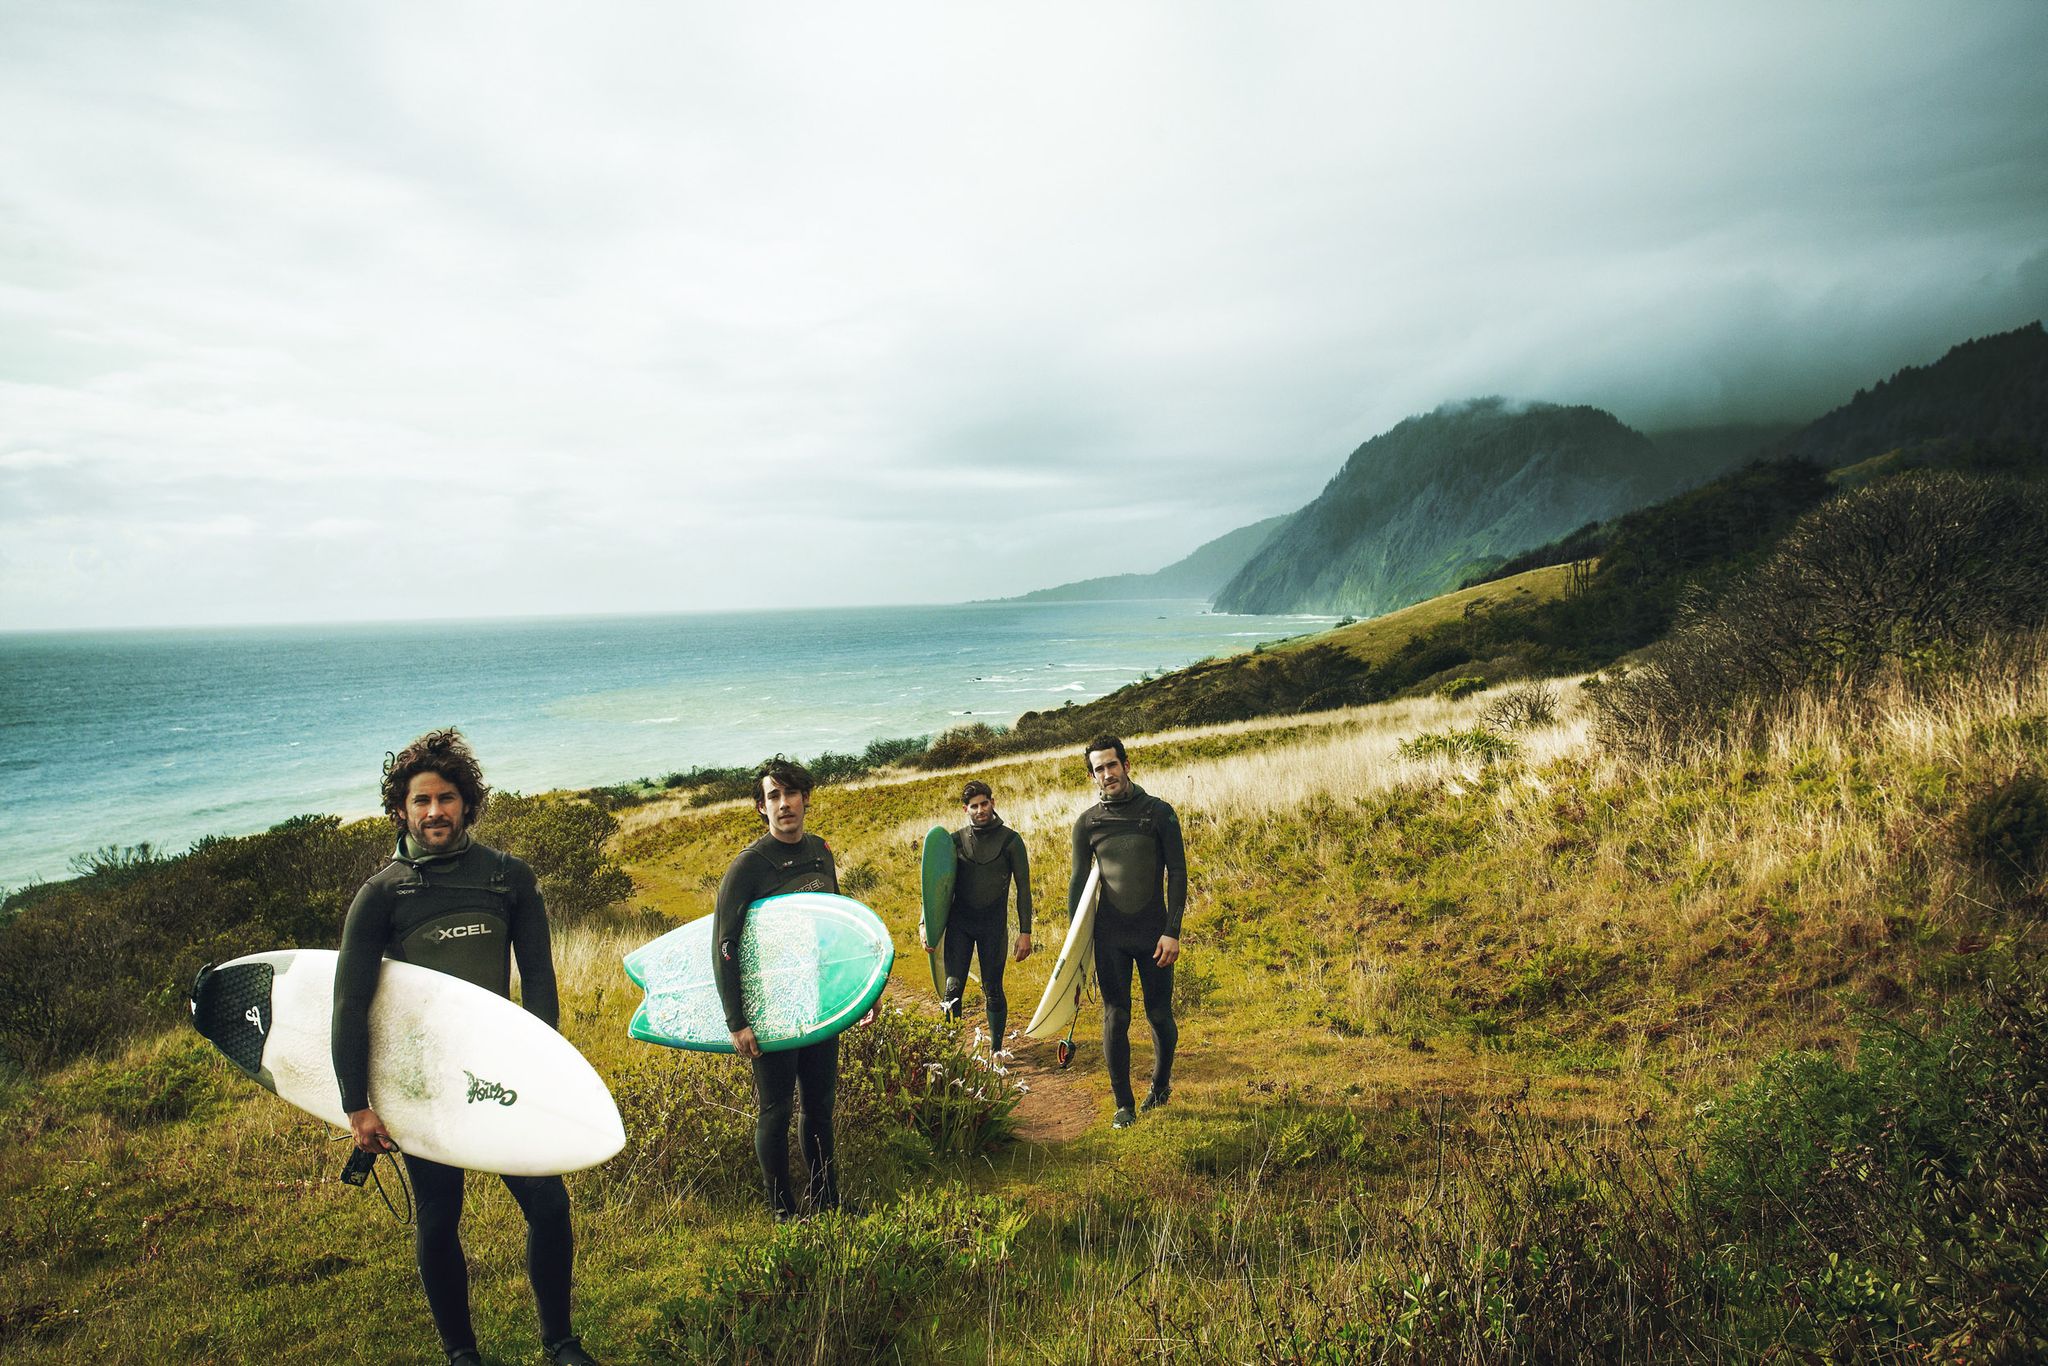 Human, Surfboard, Surfing Equipment, Surface water sports, People in nature, Coastal and oceanic landforms, Boardsport, Coast, Water sport, Surfing, 